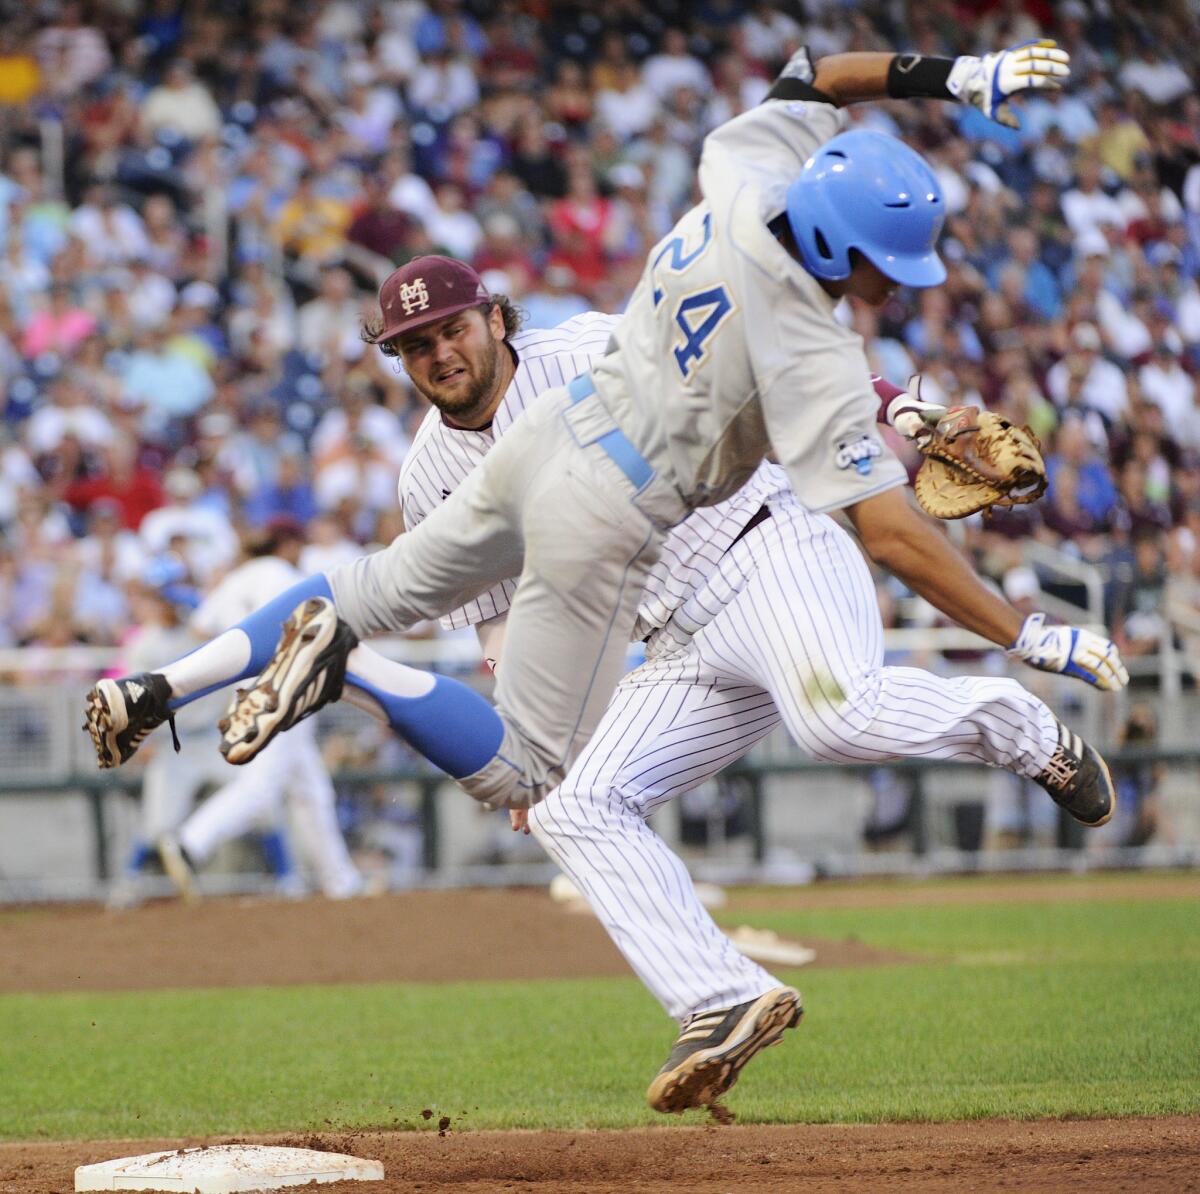 UCLA's Brian Carroll, right, and Mississippi State's Wes Rea collide a first base during the fourth inning of Game 1 of the College World Series on Monday.